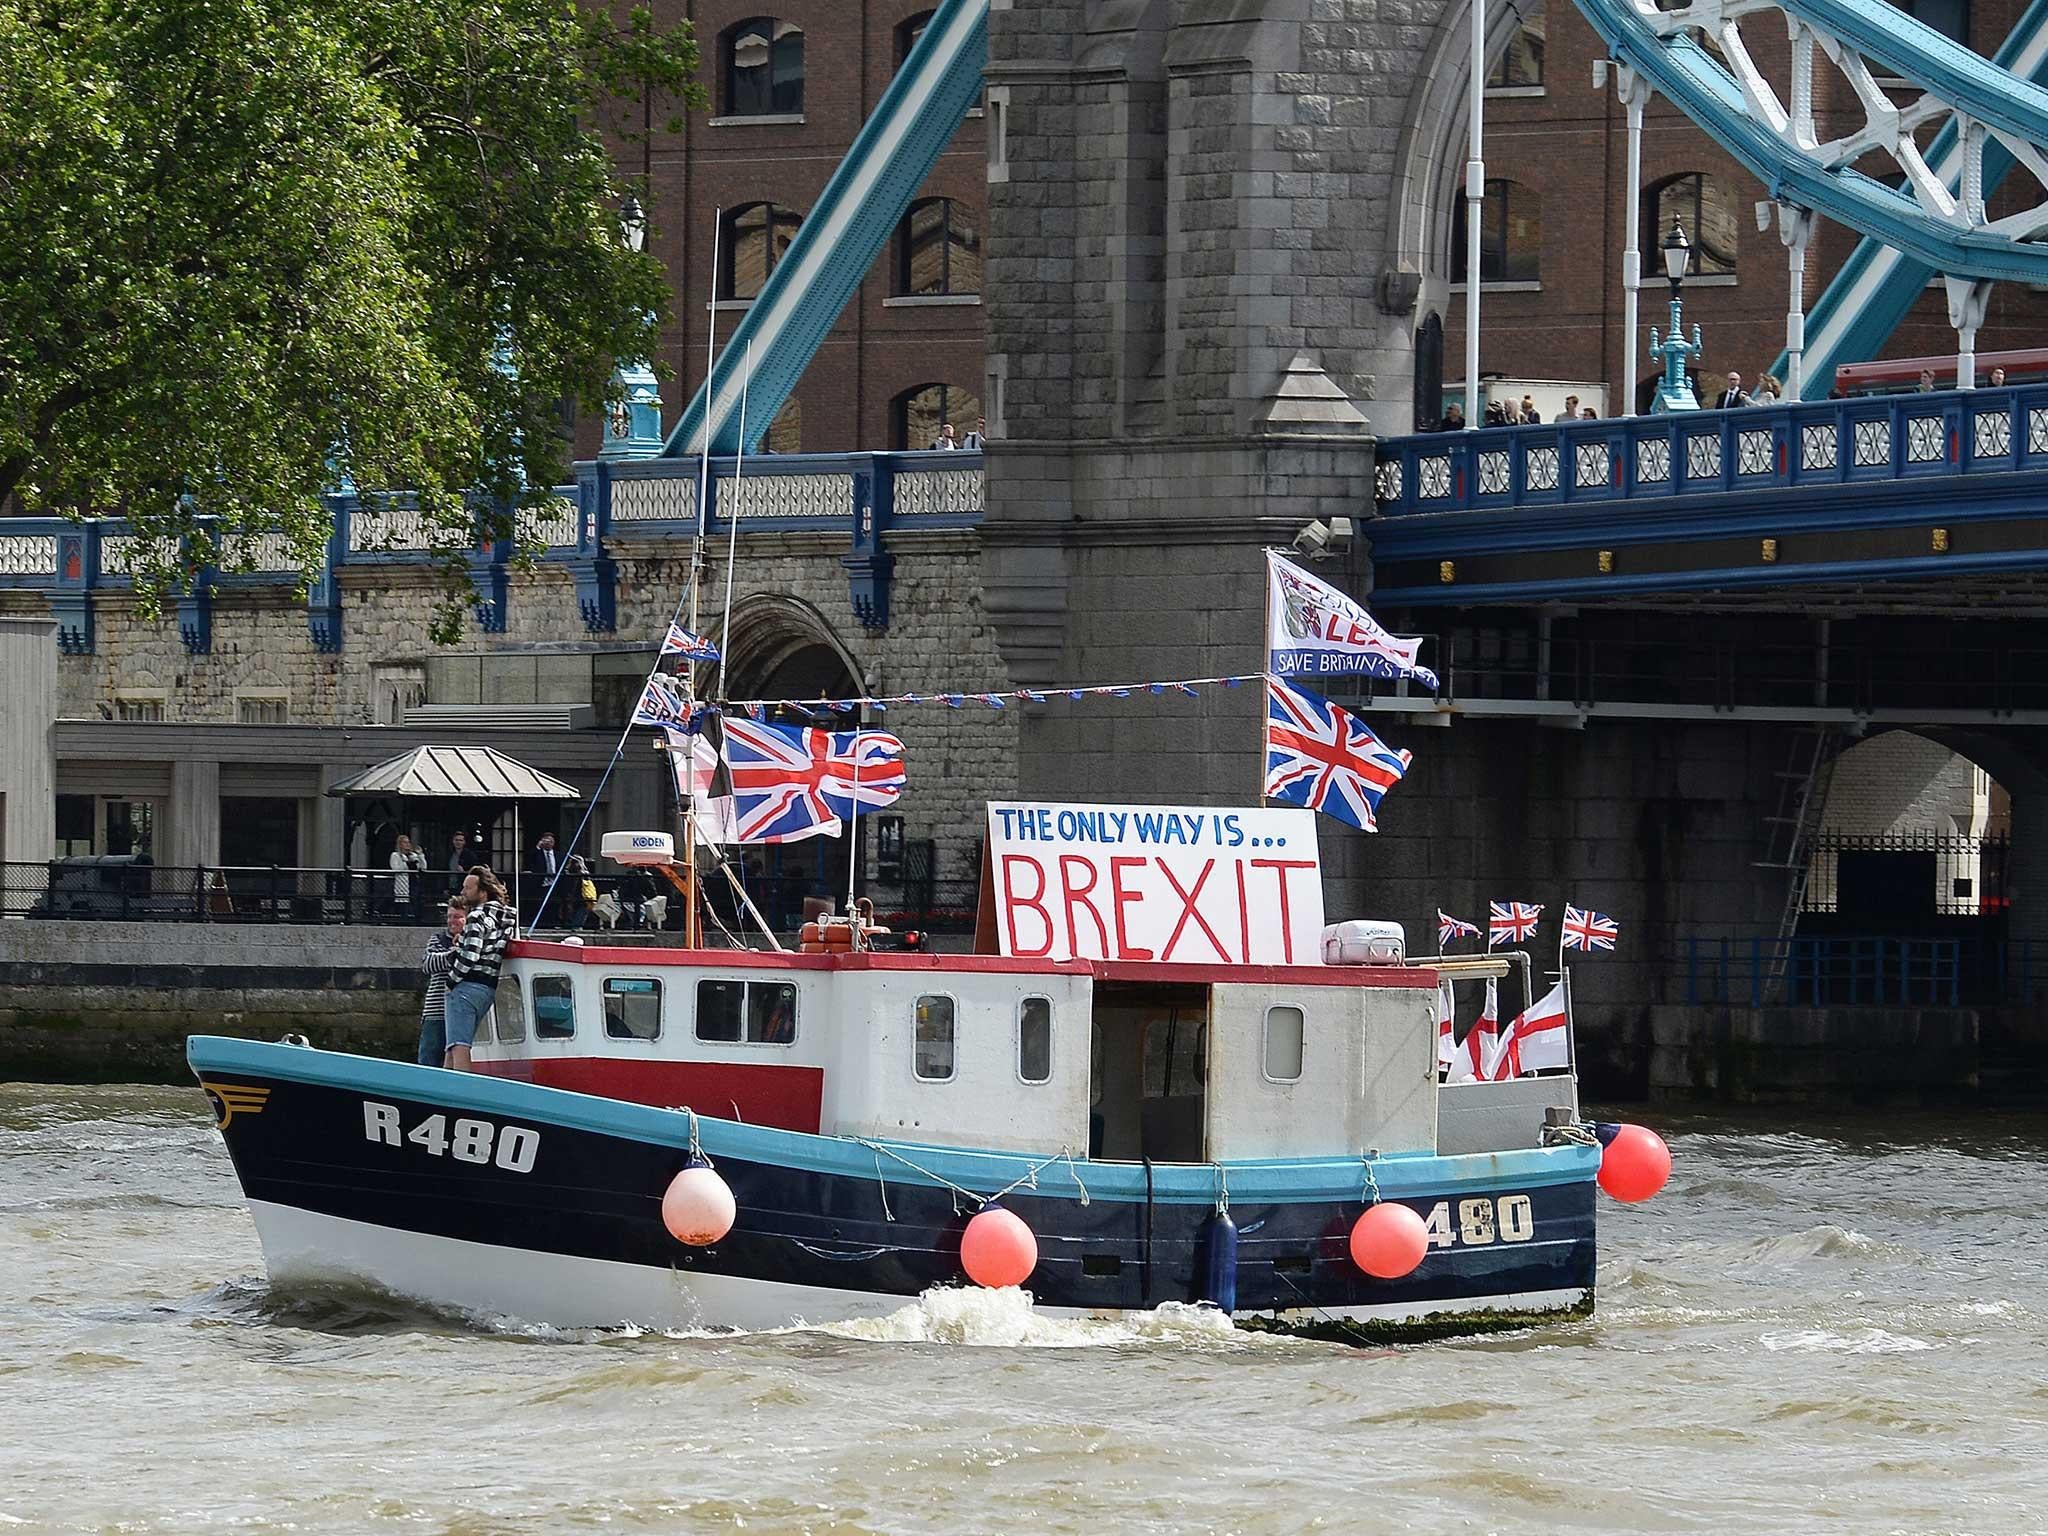 The yacht that Mr Fox wants the Queen to have would be considerably bigger than this Brexit flotilla